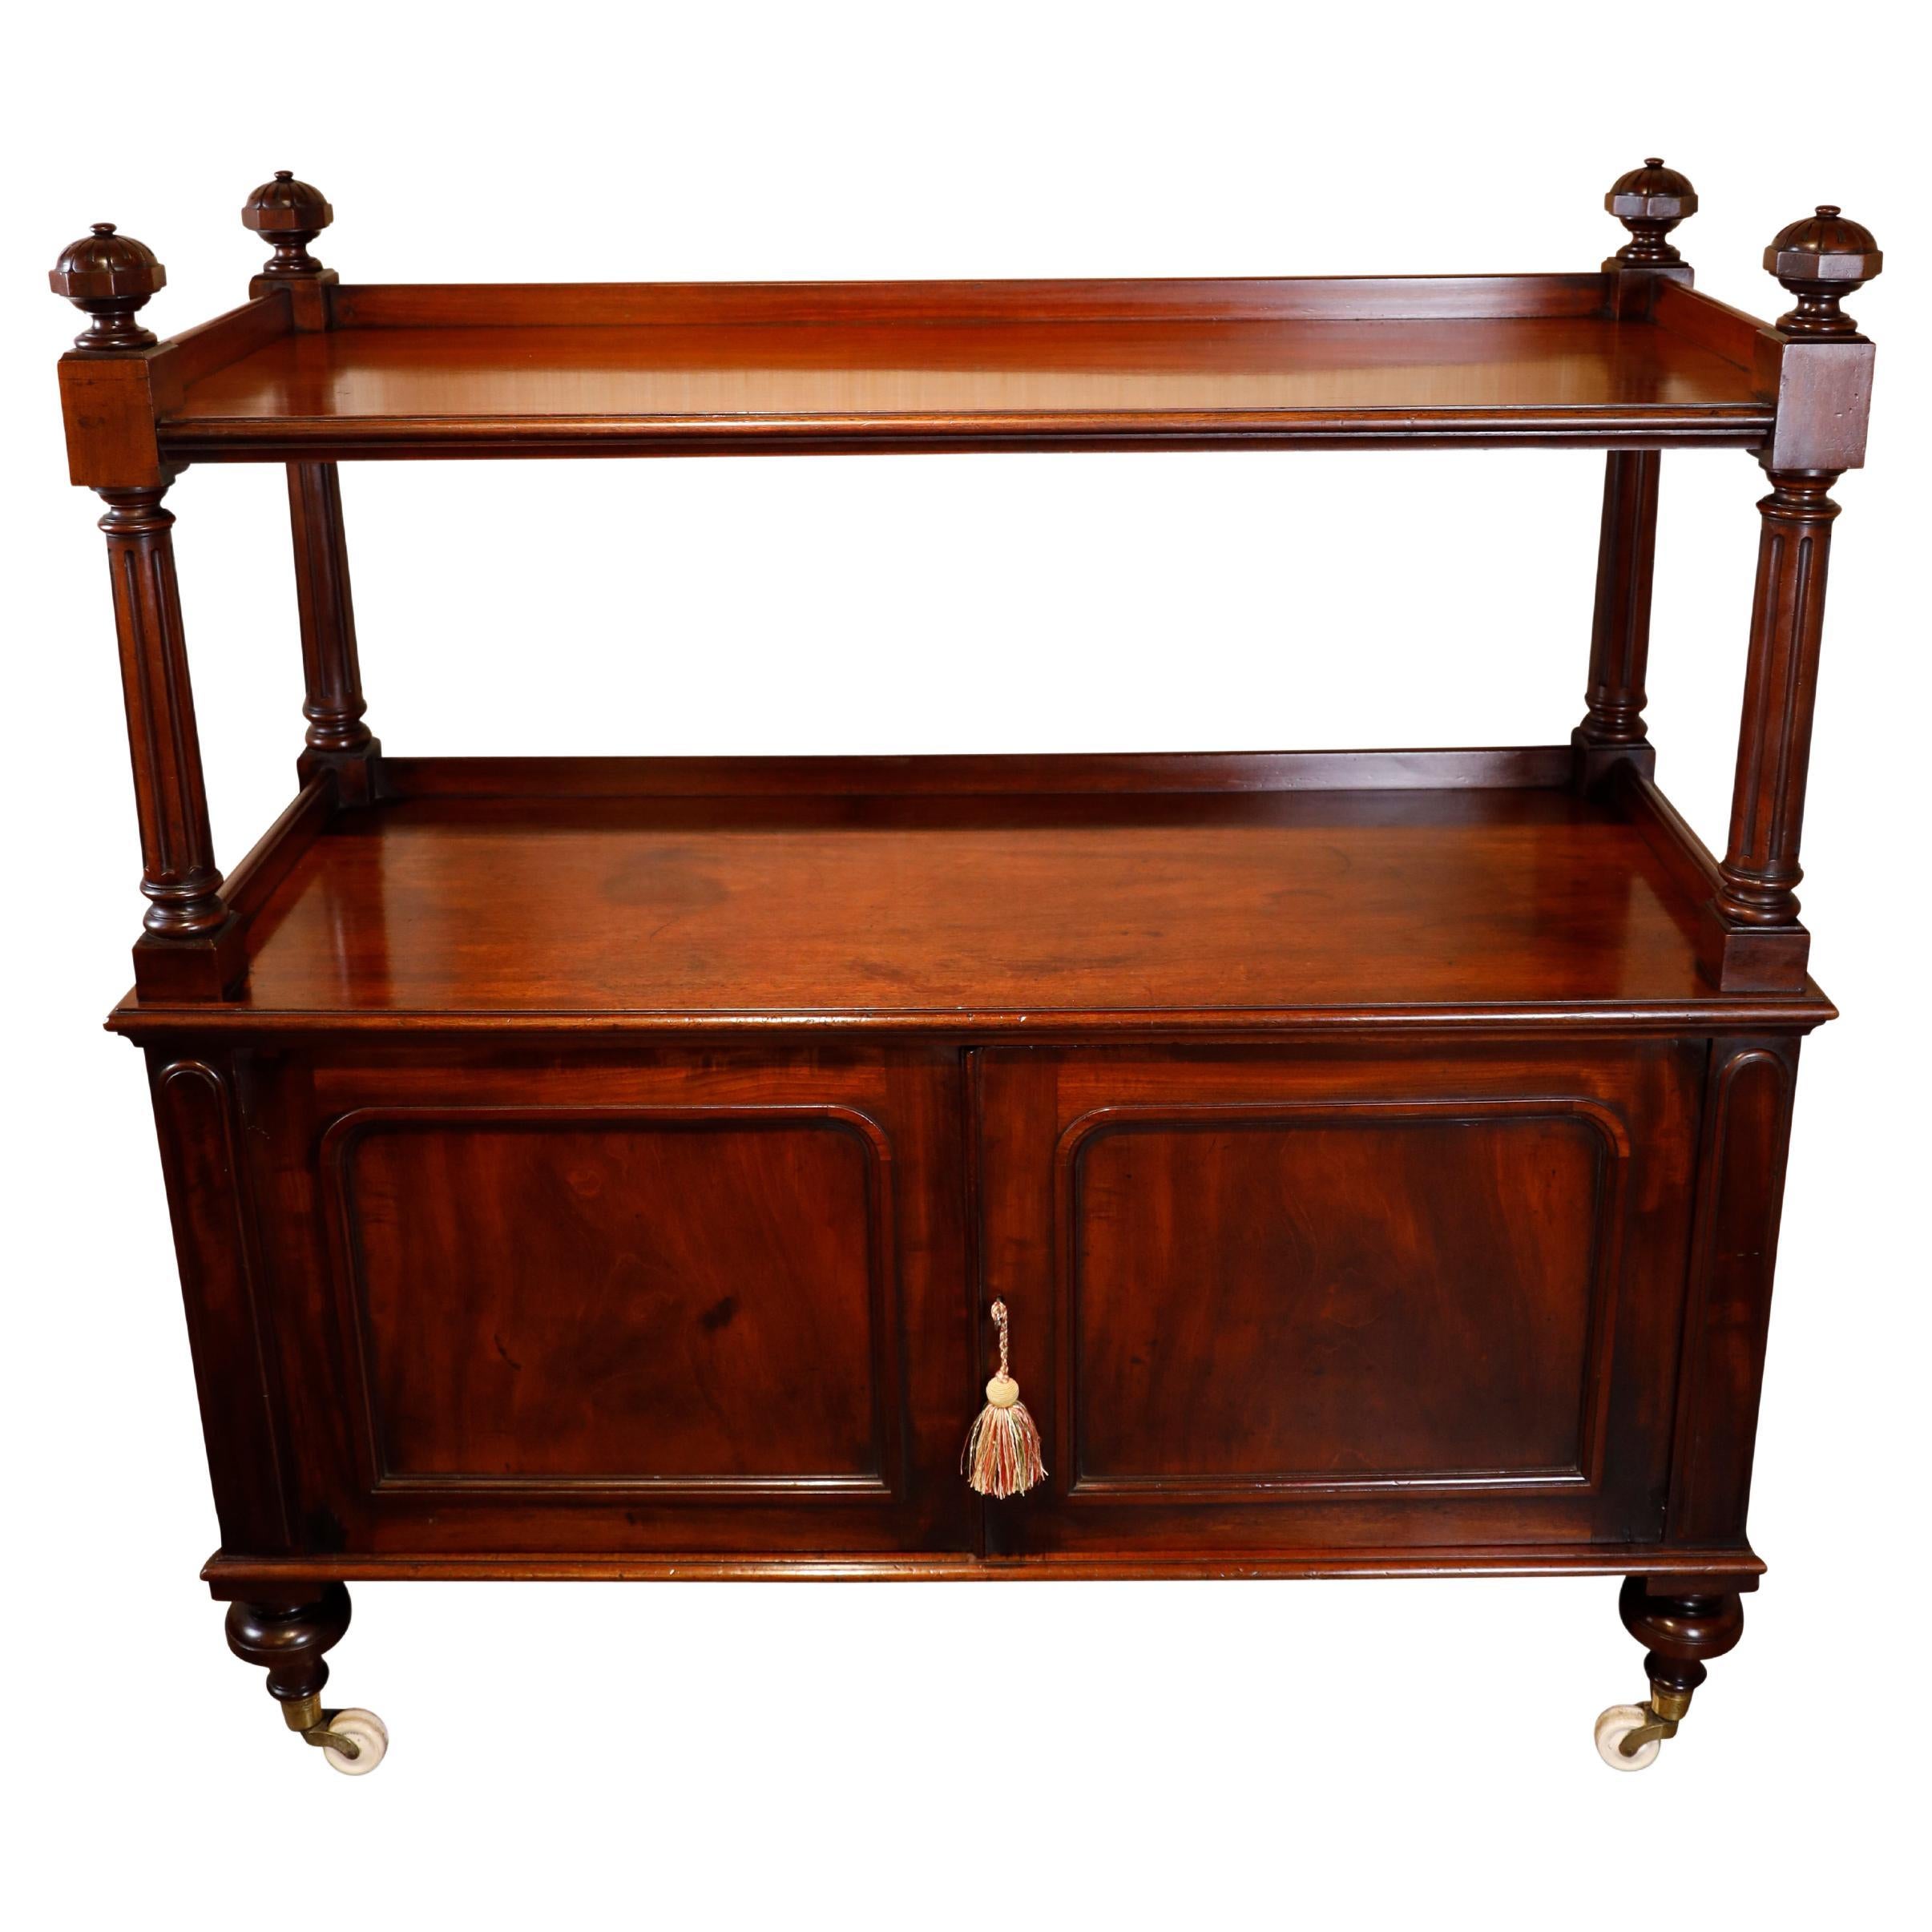 Victorian Mahogany Trolly / Dumbwaiter For Sale